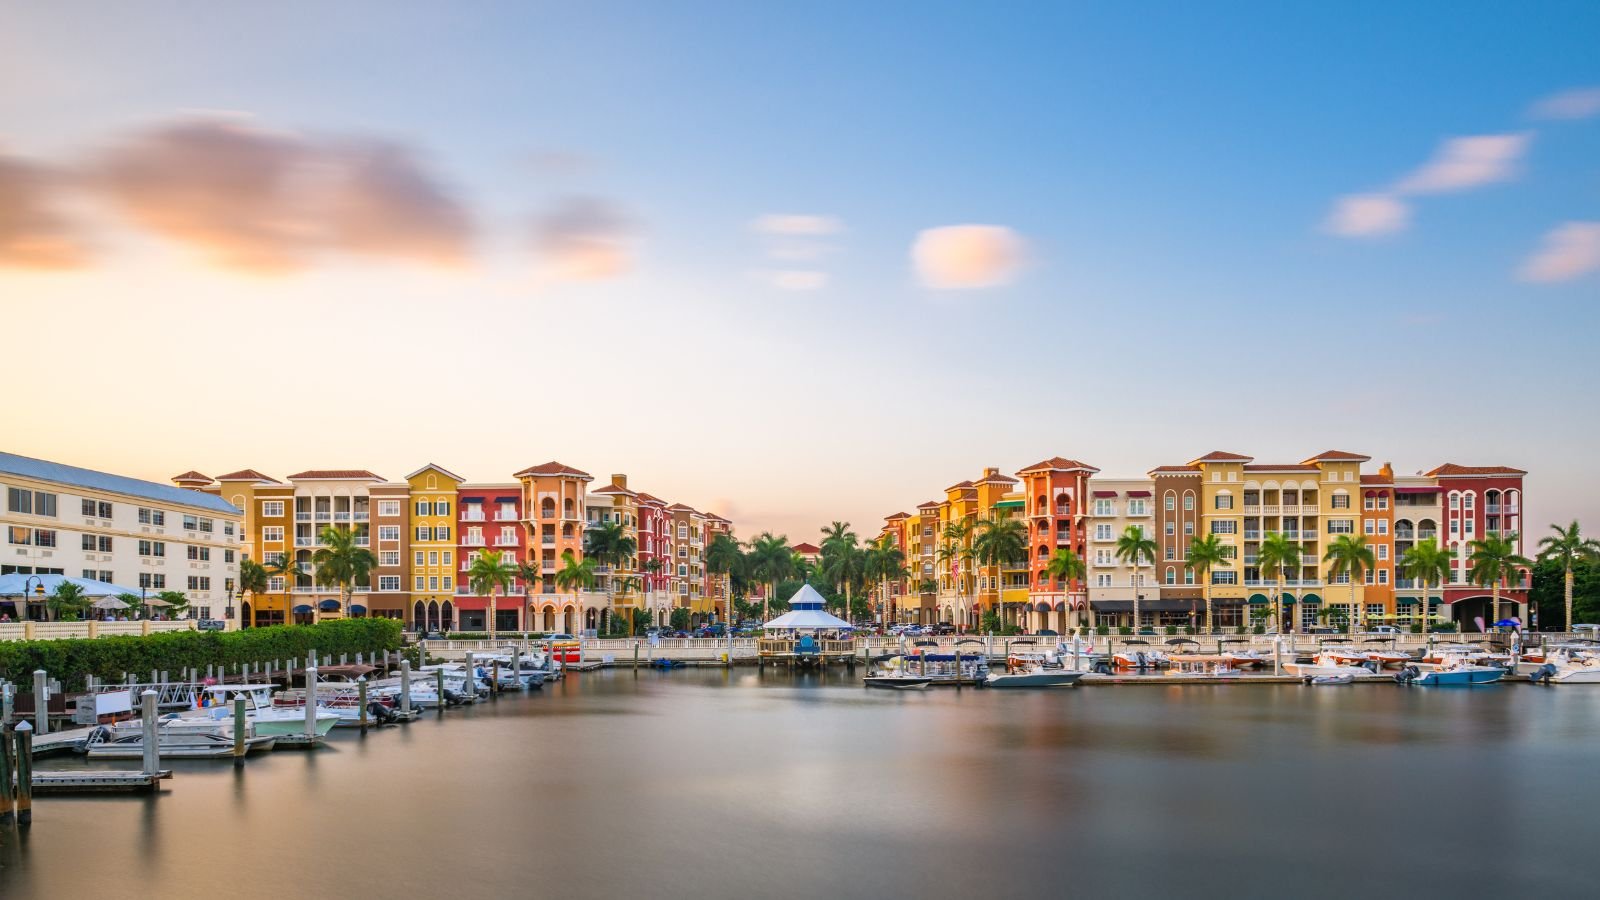 <p>Naples is on Florida’s Paradise Coast. It has beautiful white sand beaches. They also have top-rated golf courses, fine dining, and a thriving arts scene. The walkable downtown offers excellent shopping and sightseeing. Nearby nature preserves provide opportunities to spot birds and other wildlife.</p>